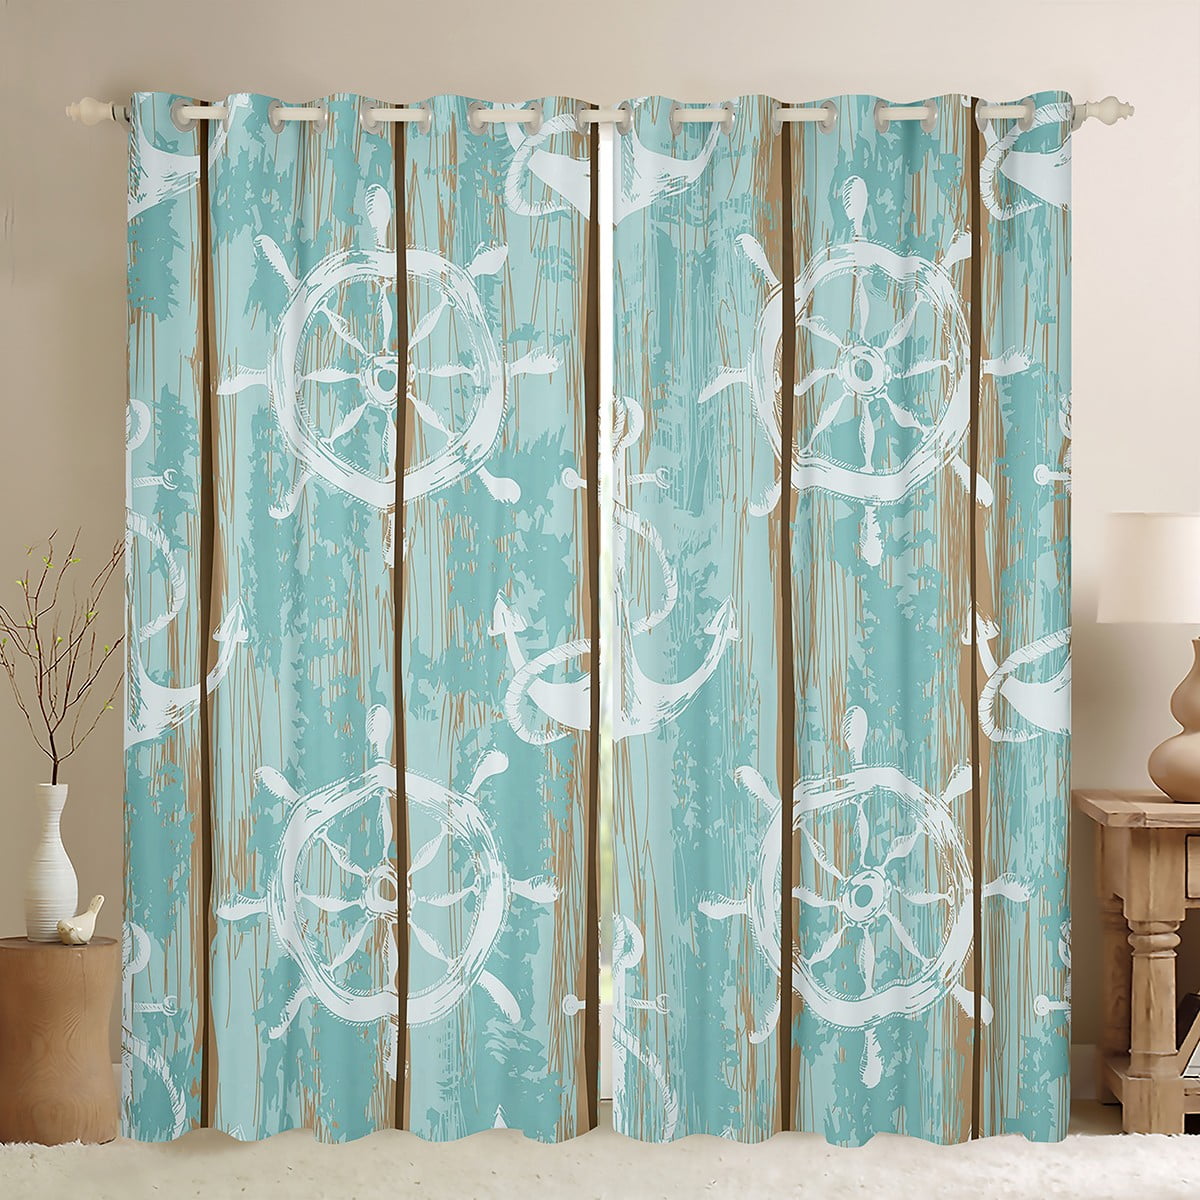 Nautical Anchor Curtains Rustic Farmhouse Style Blackout Cabin Lodge Decor Coastal Compass Rudder Window Ds For Bedroom Country Western Ocean Theme Treatments 42 X63 Com